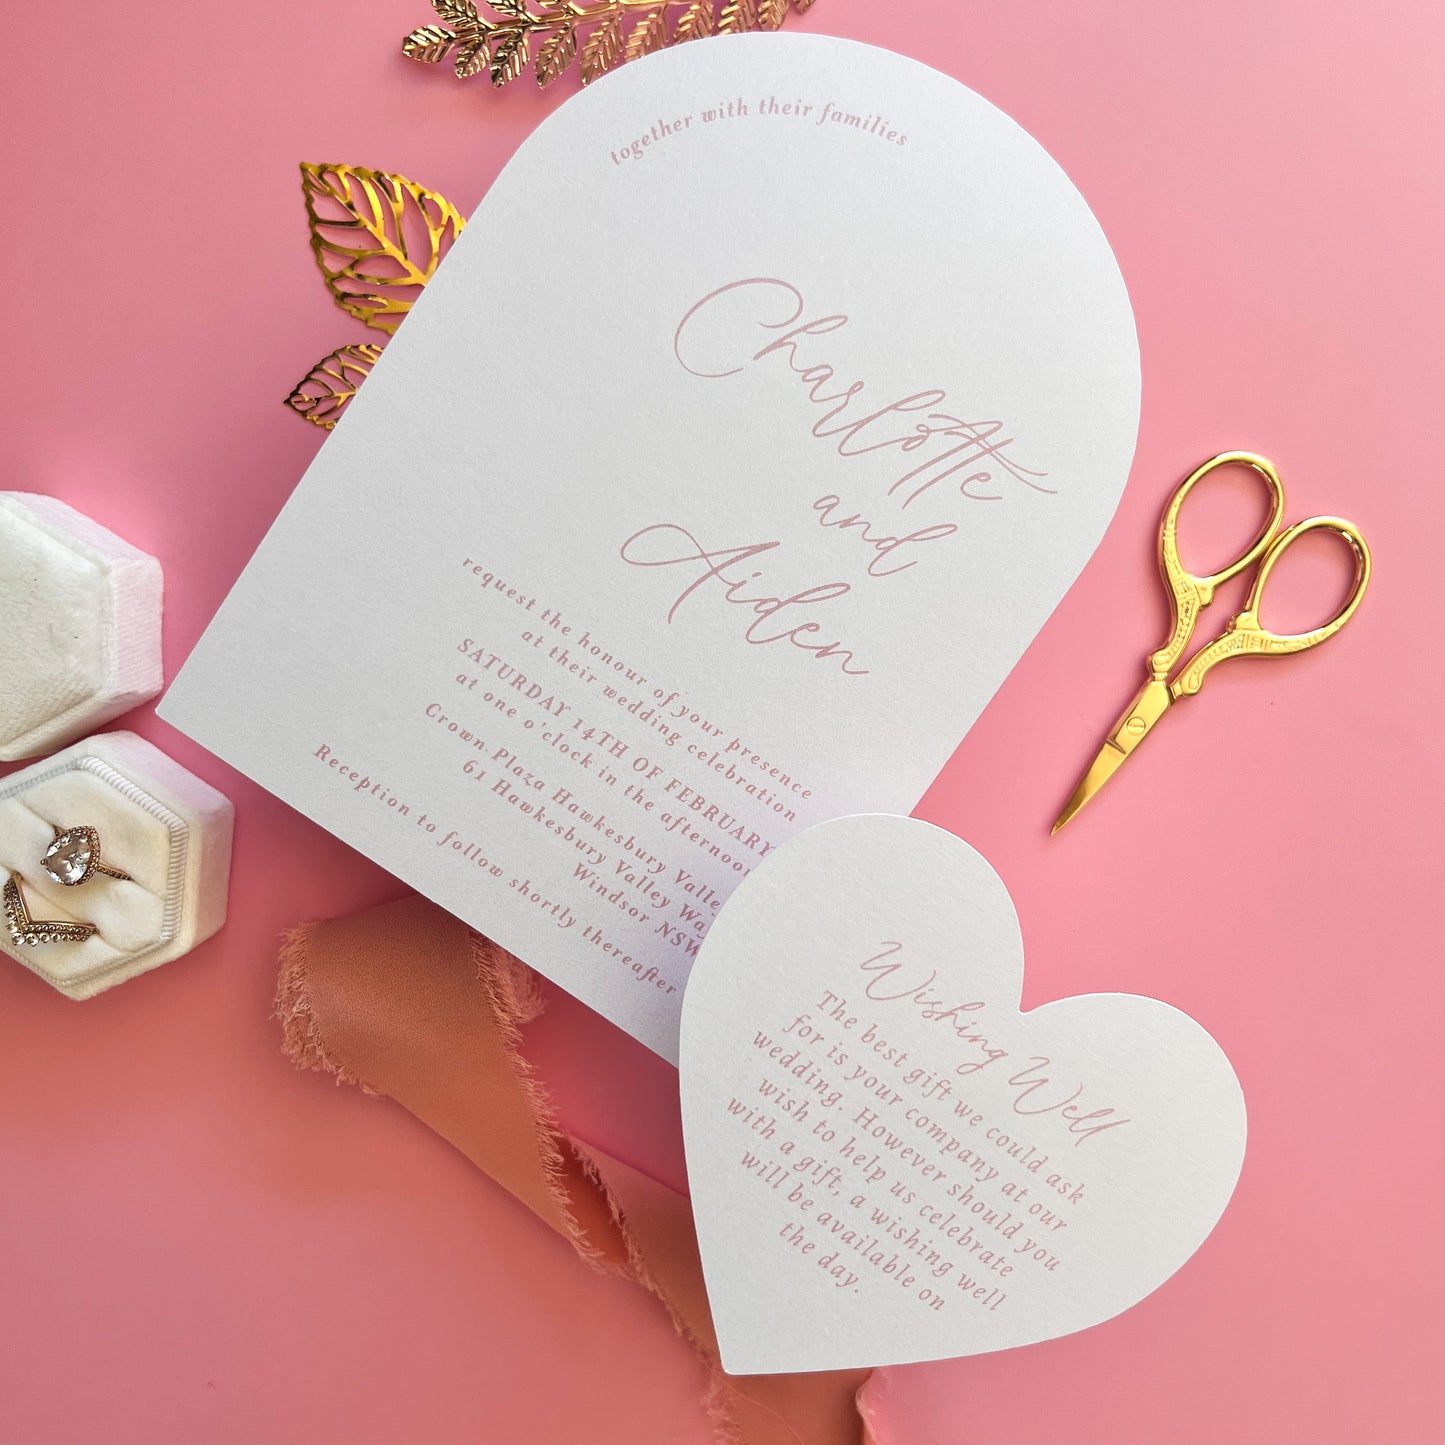 Arch and heart shaped printed wedding invitation dusty pink and white